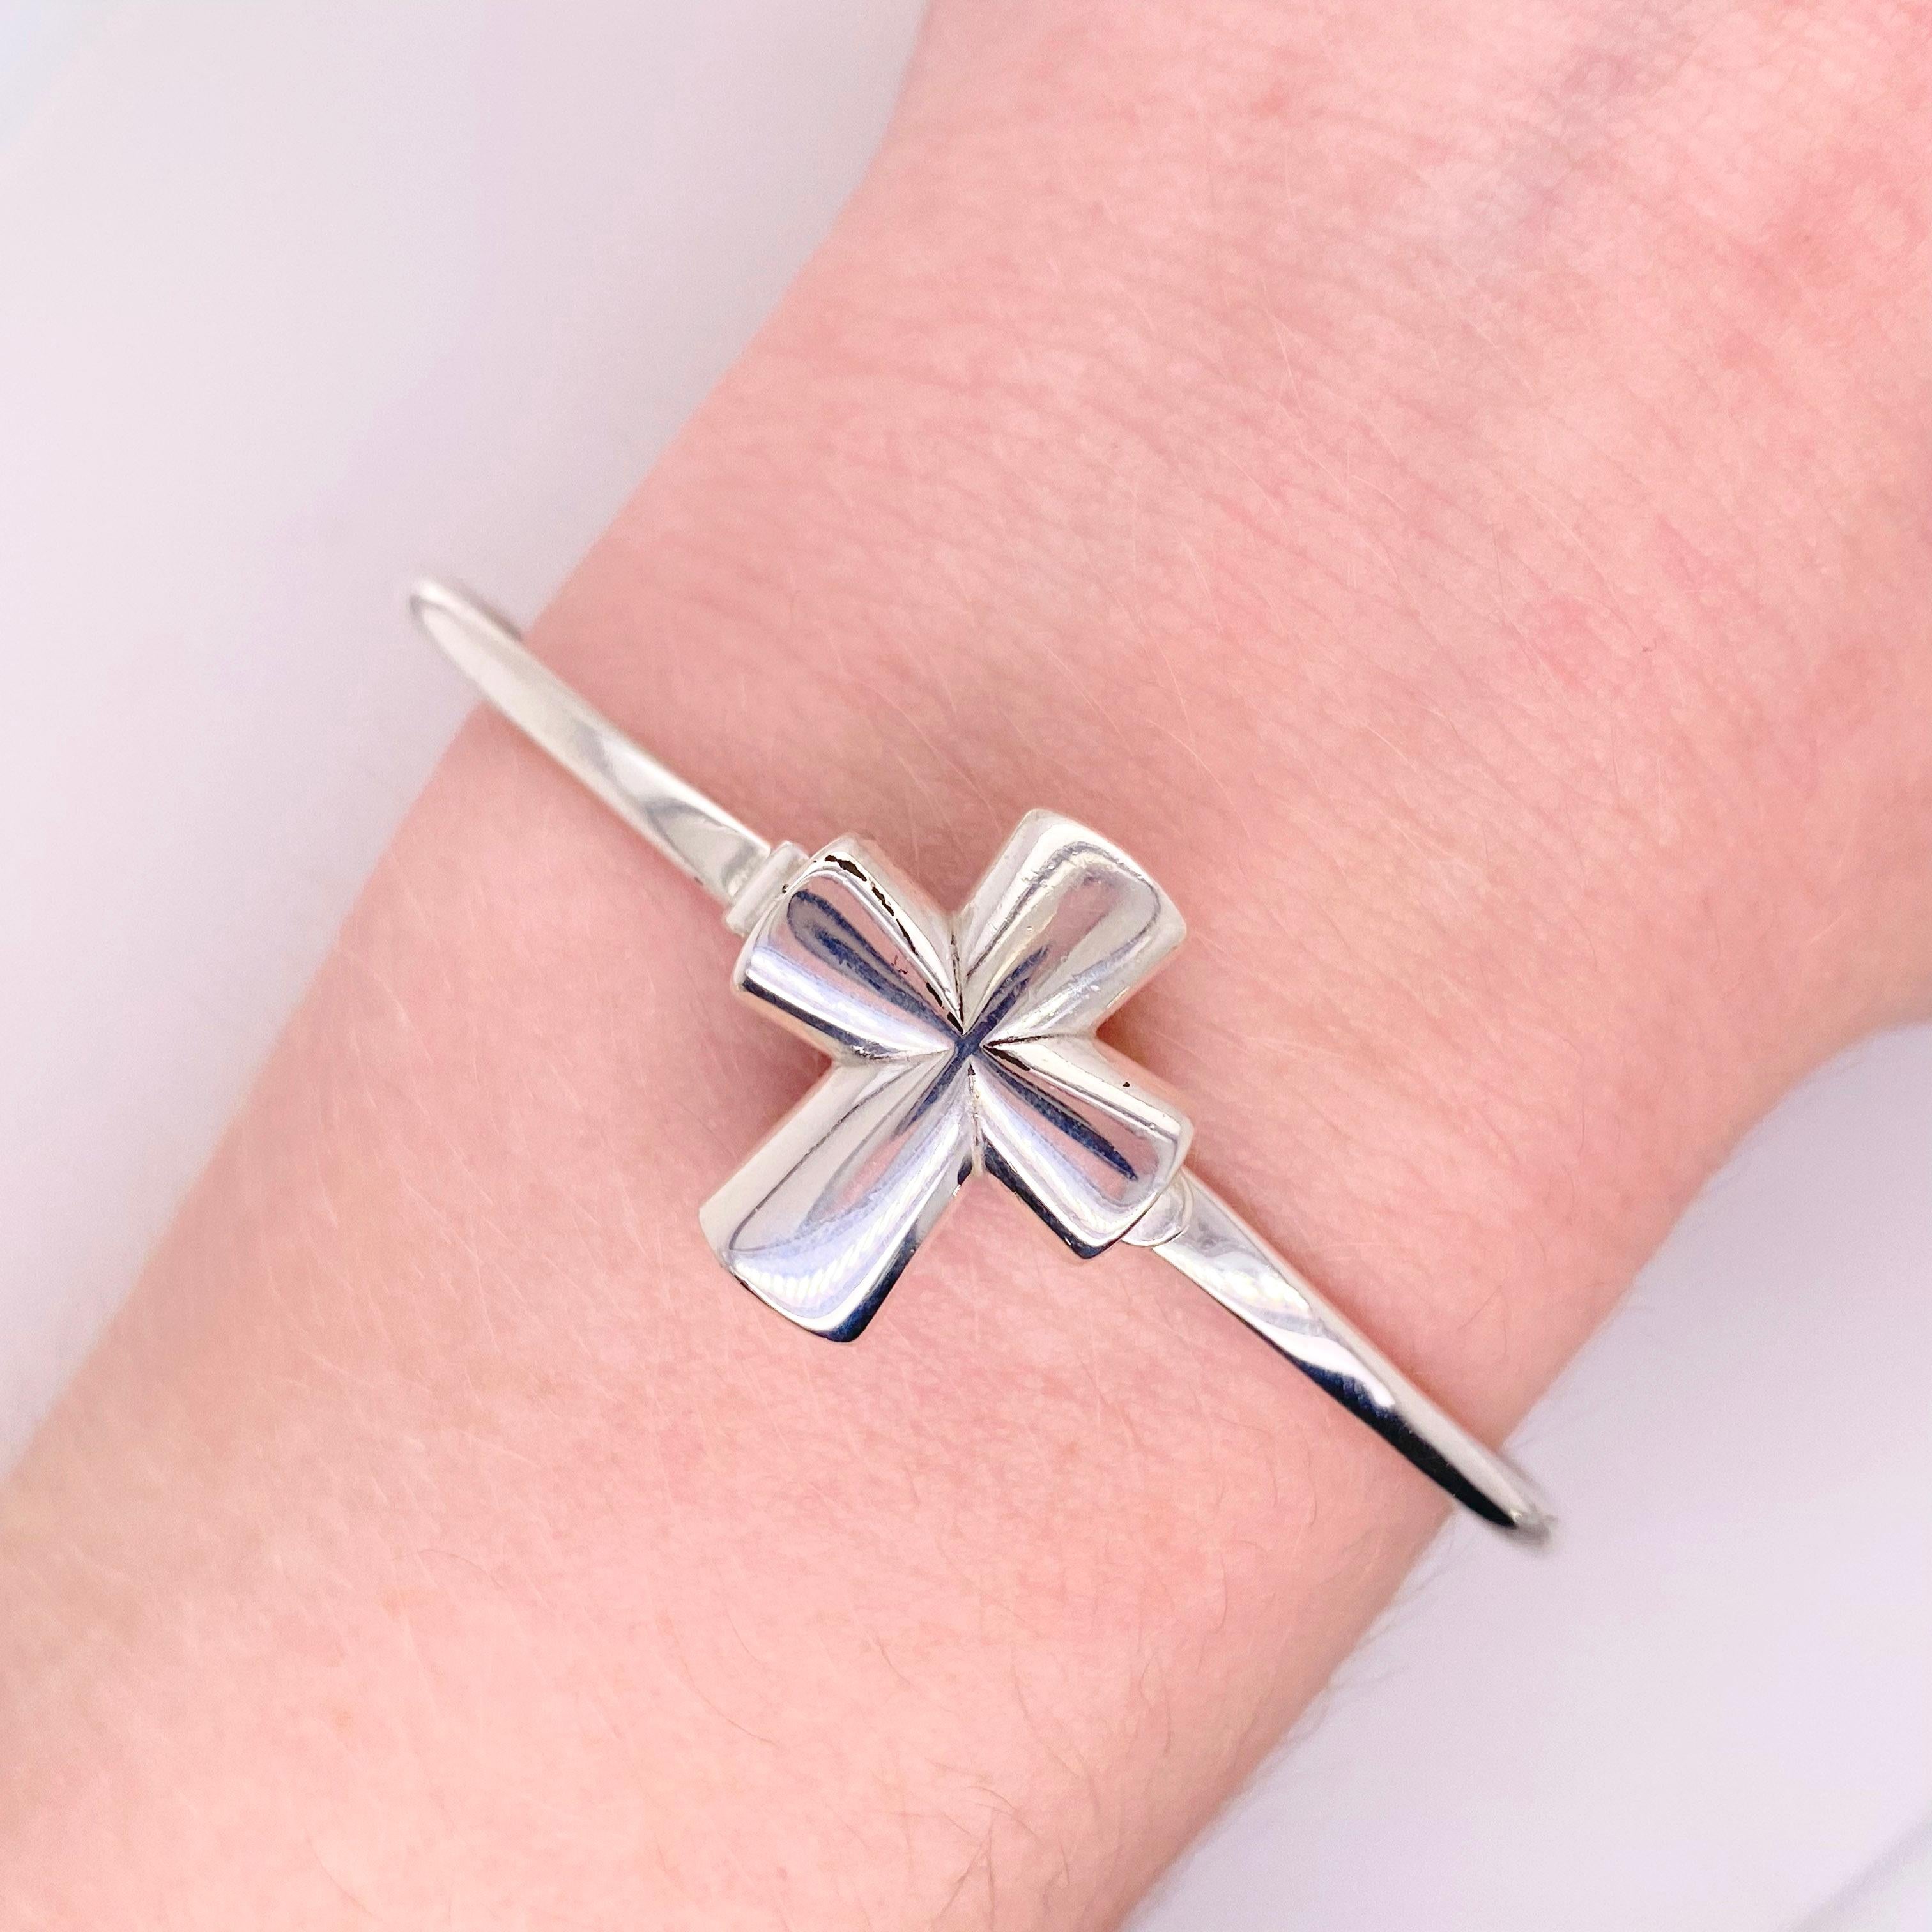 James Avery makes some of the best sterling silver in America. This cross represents faith in God and the Bible. The bangle bracelet can be worn every day and is very omfortable to wear! The details for this gorgeous bracelet are listed